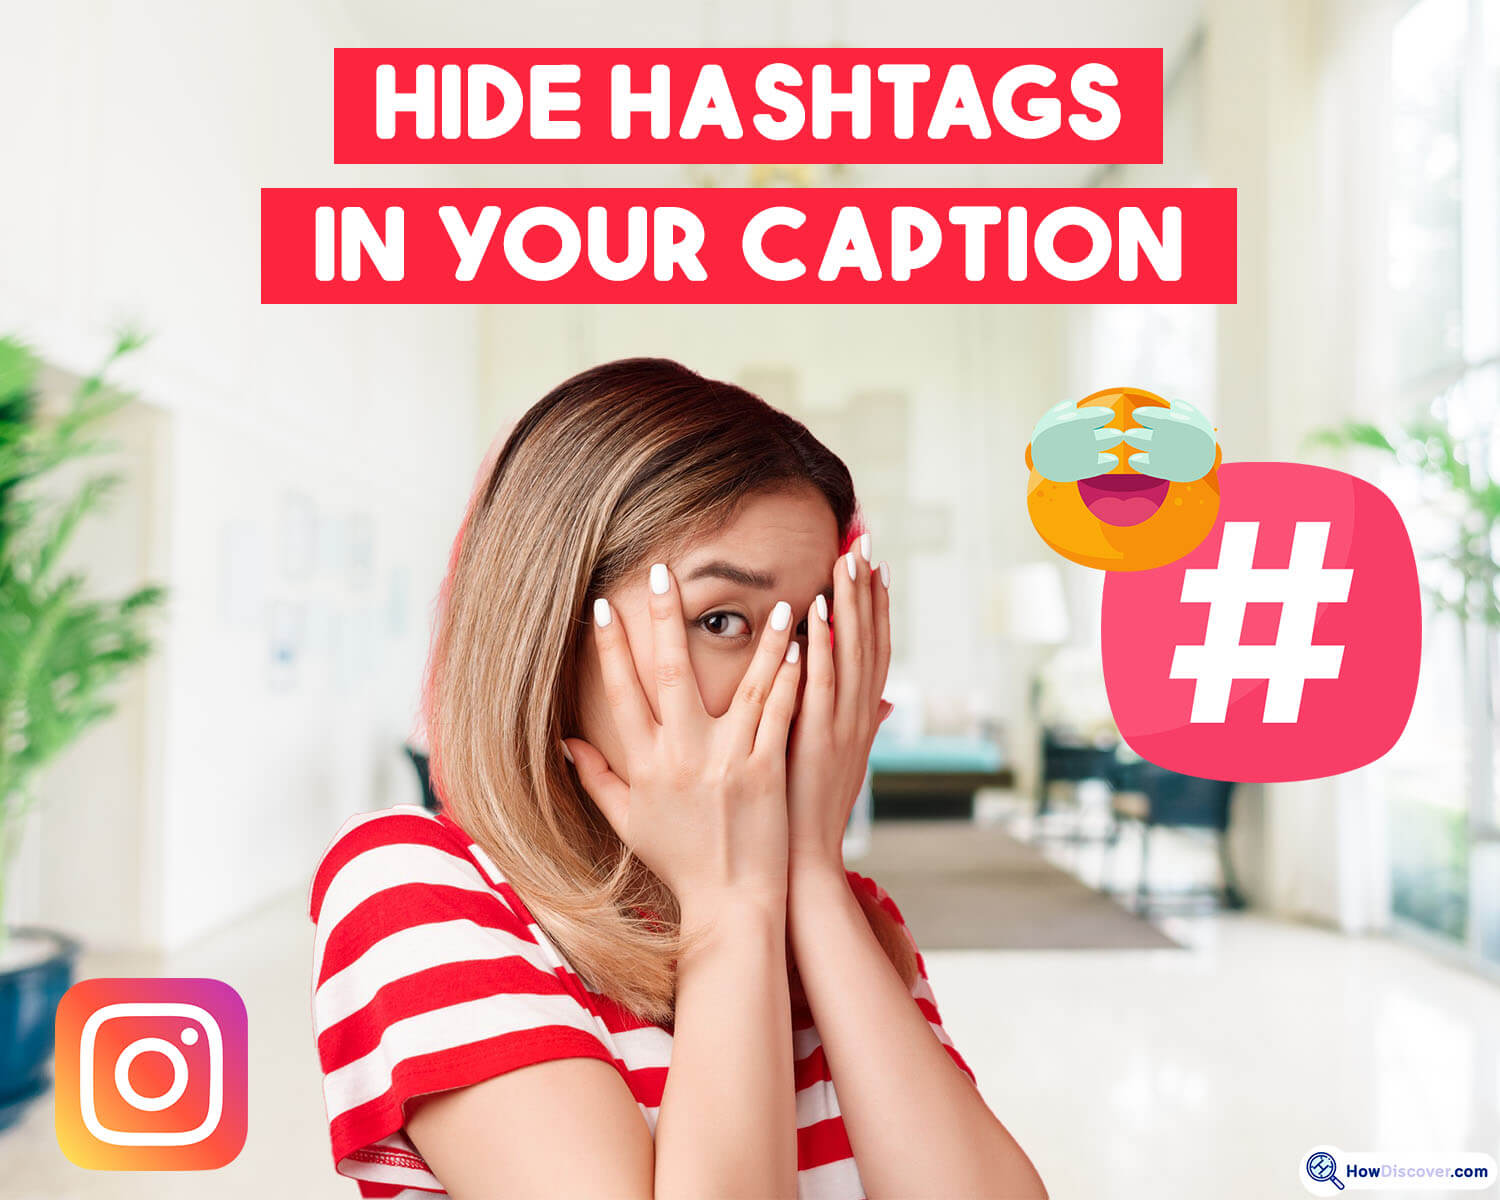 4 Tips & Tricks to get your hashtags hidden in your caption - Hiding Hashtags On Instagram